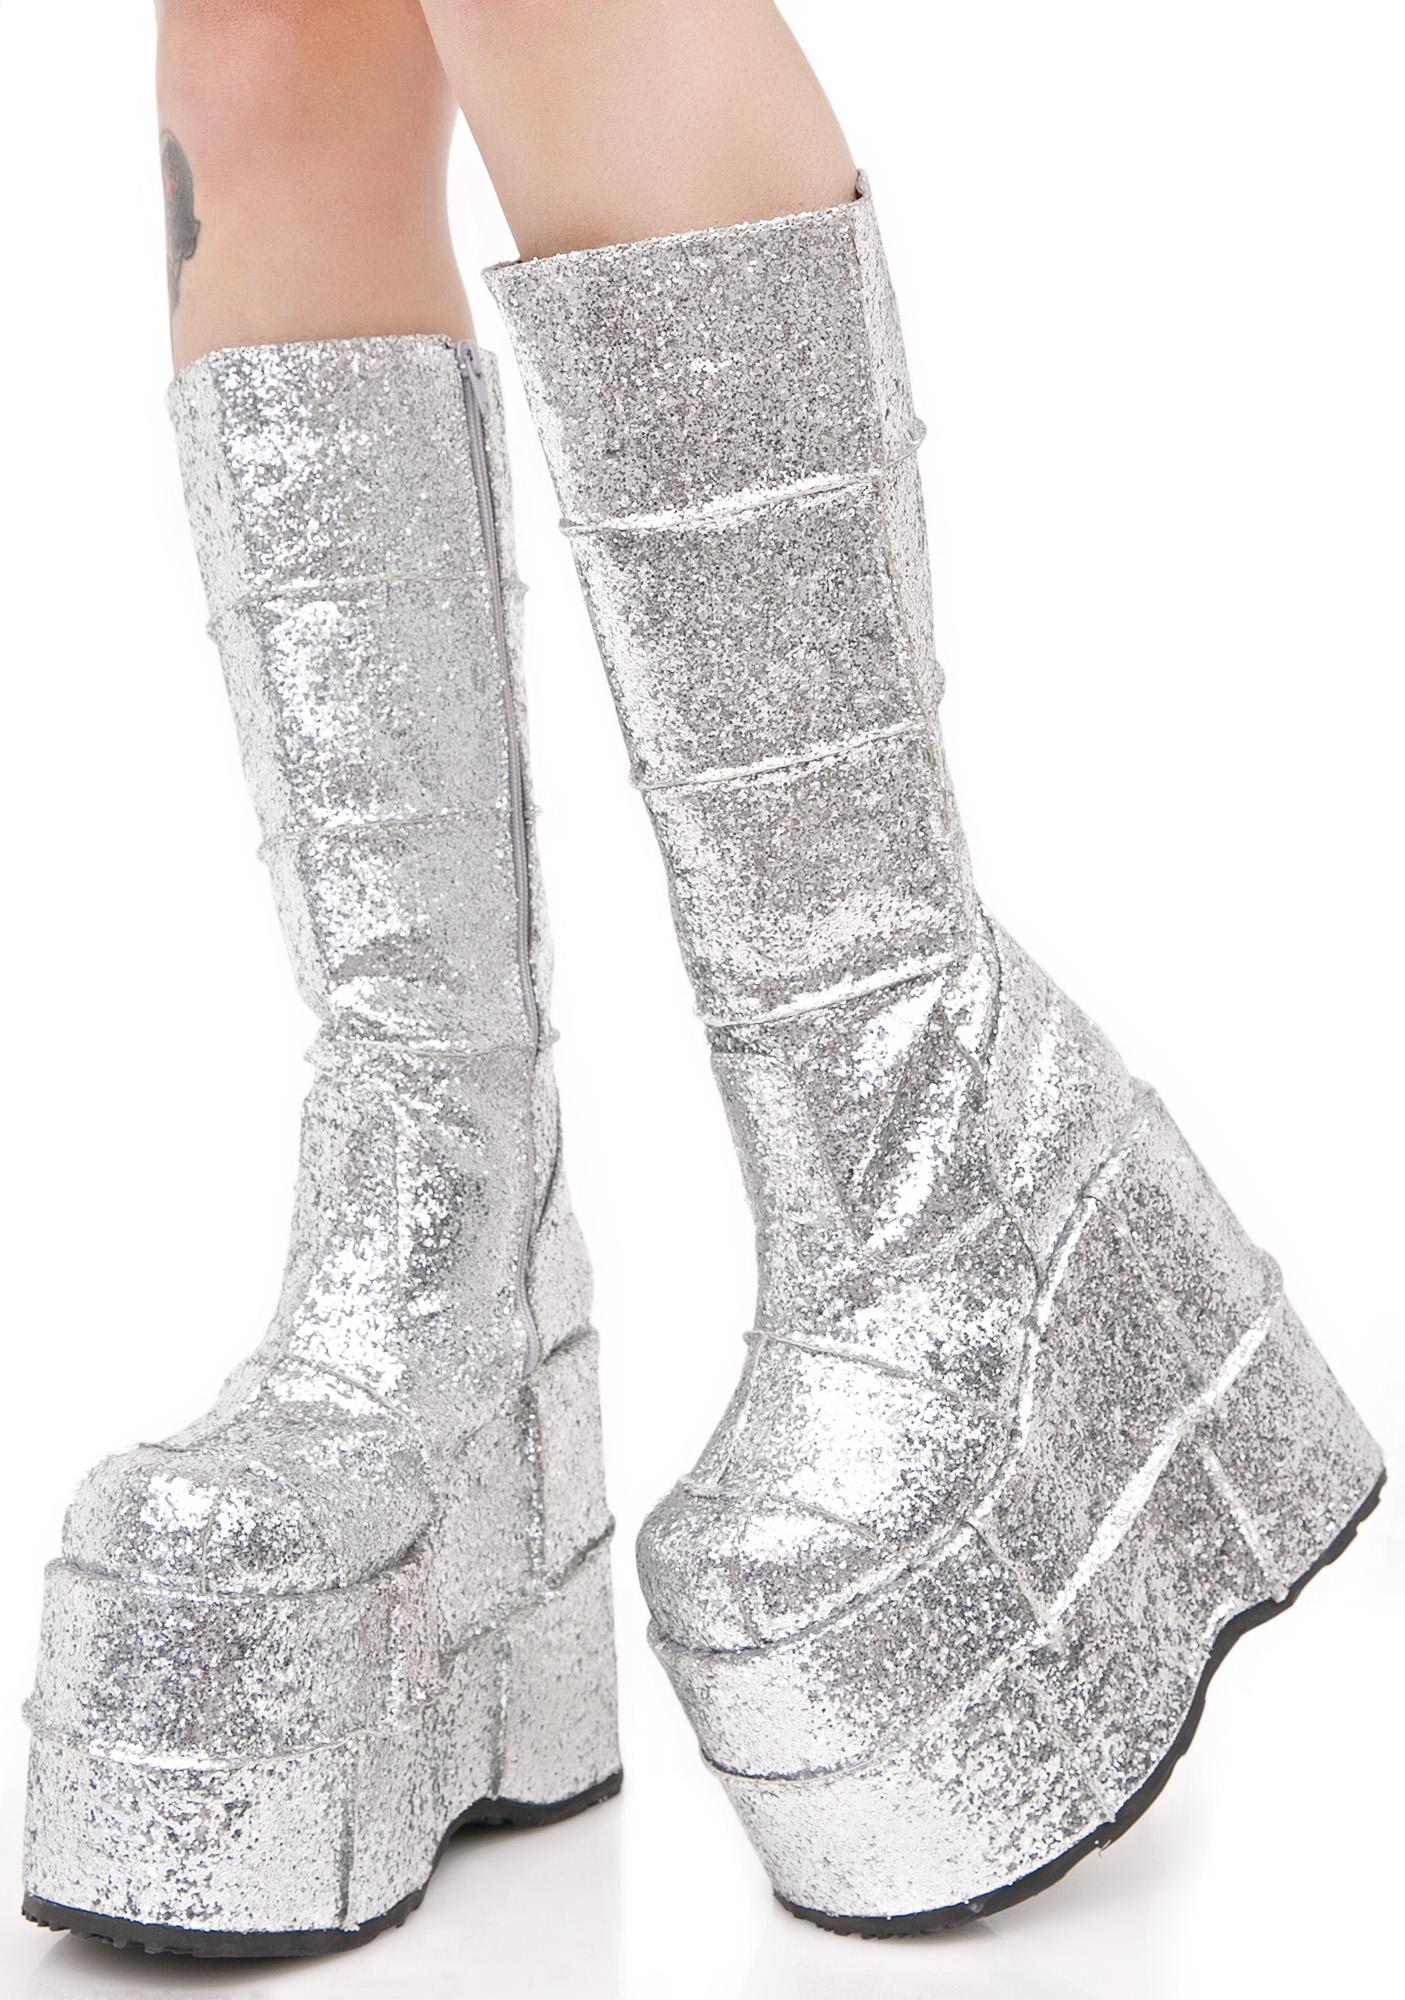 silver sparkly boots